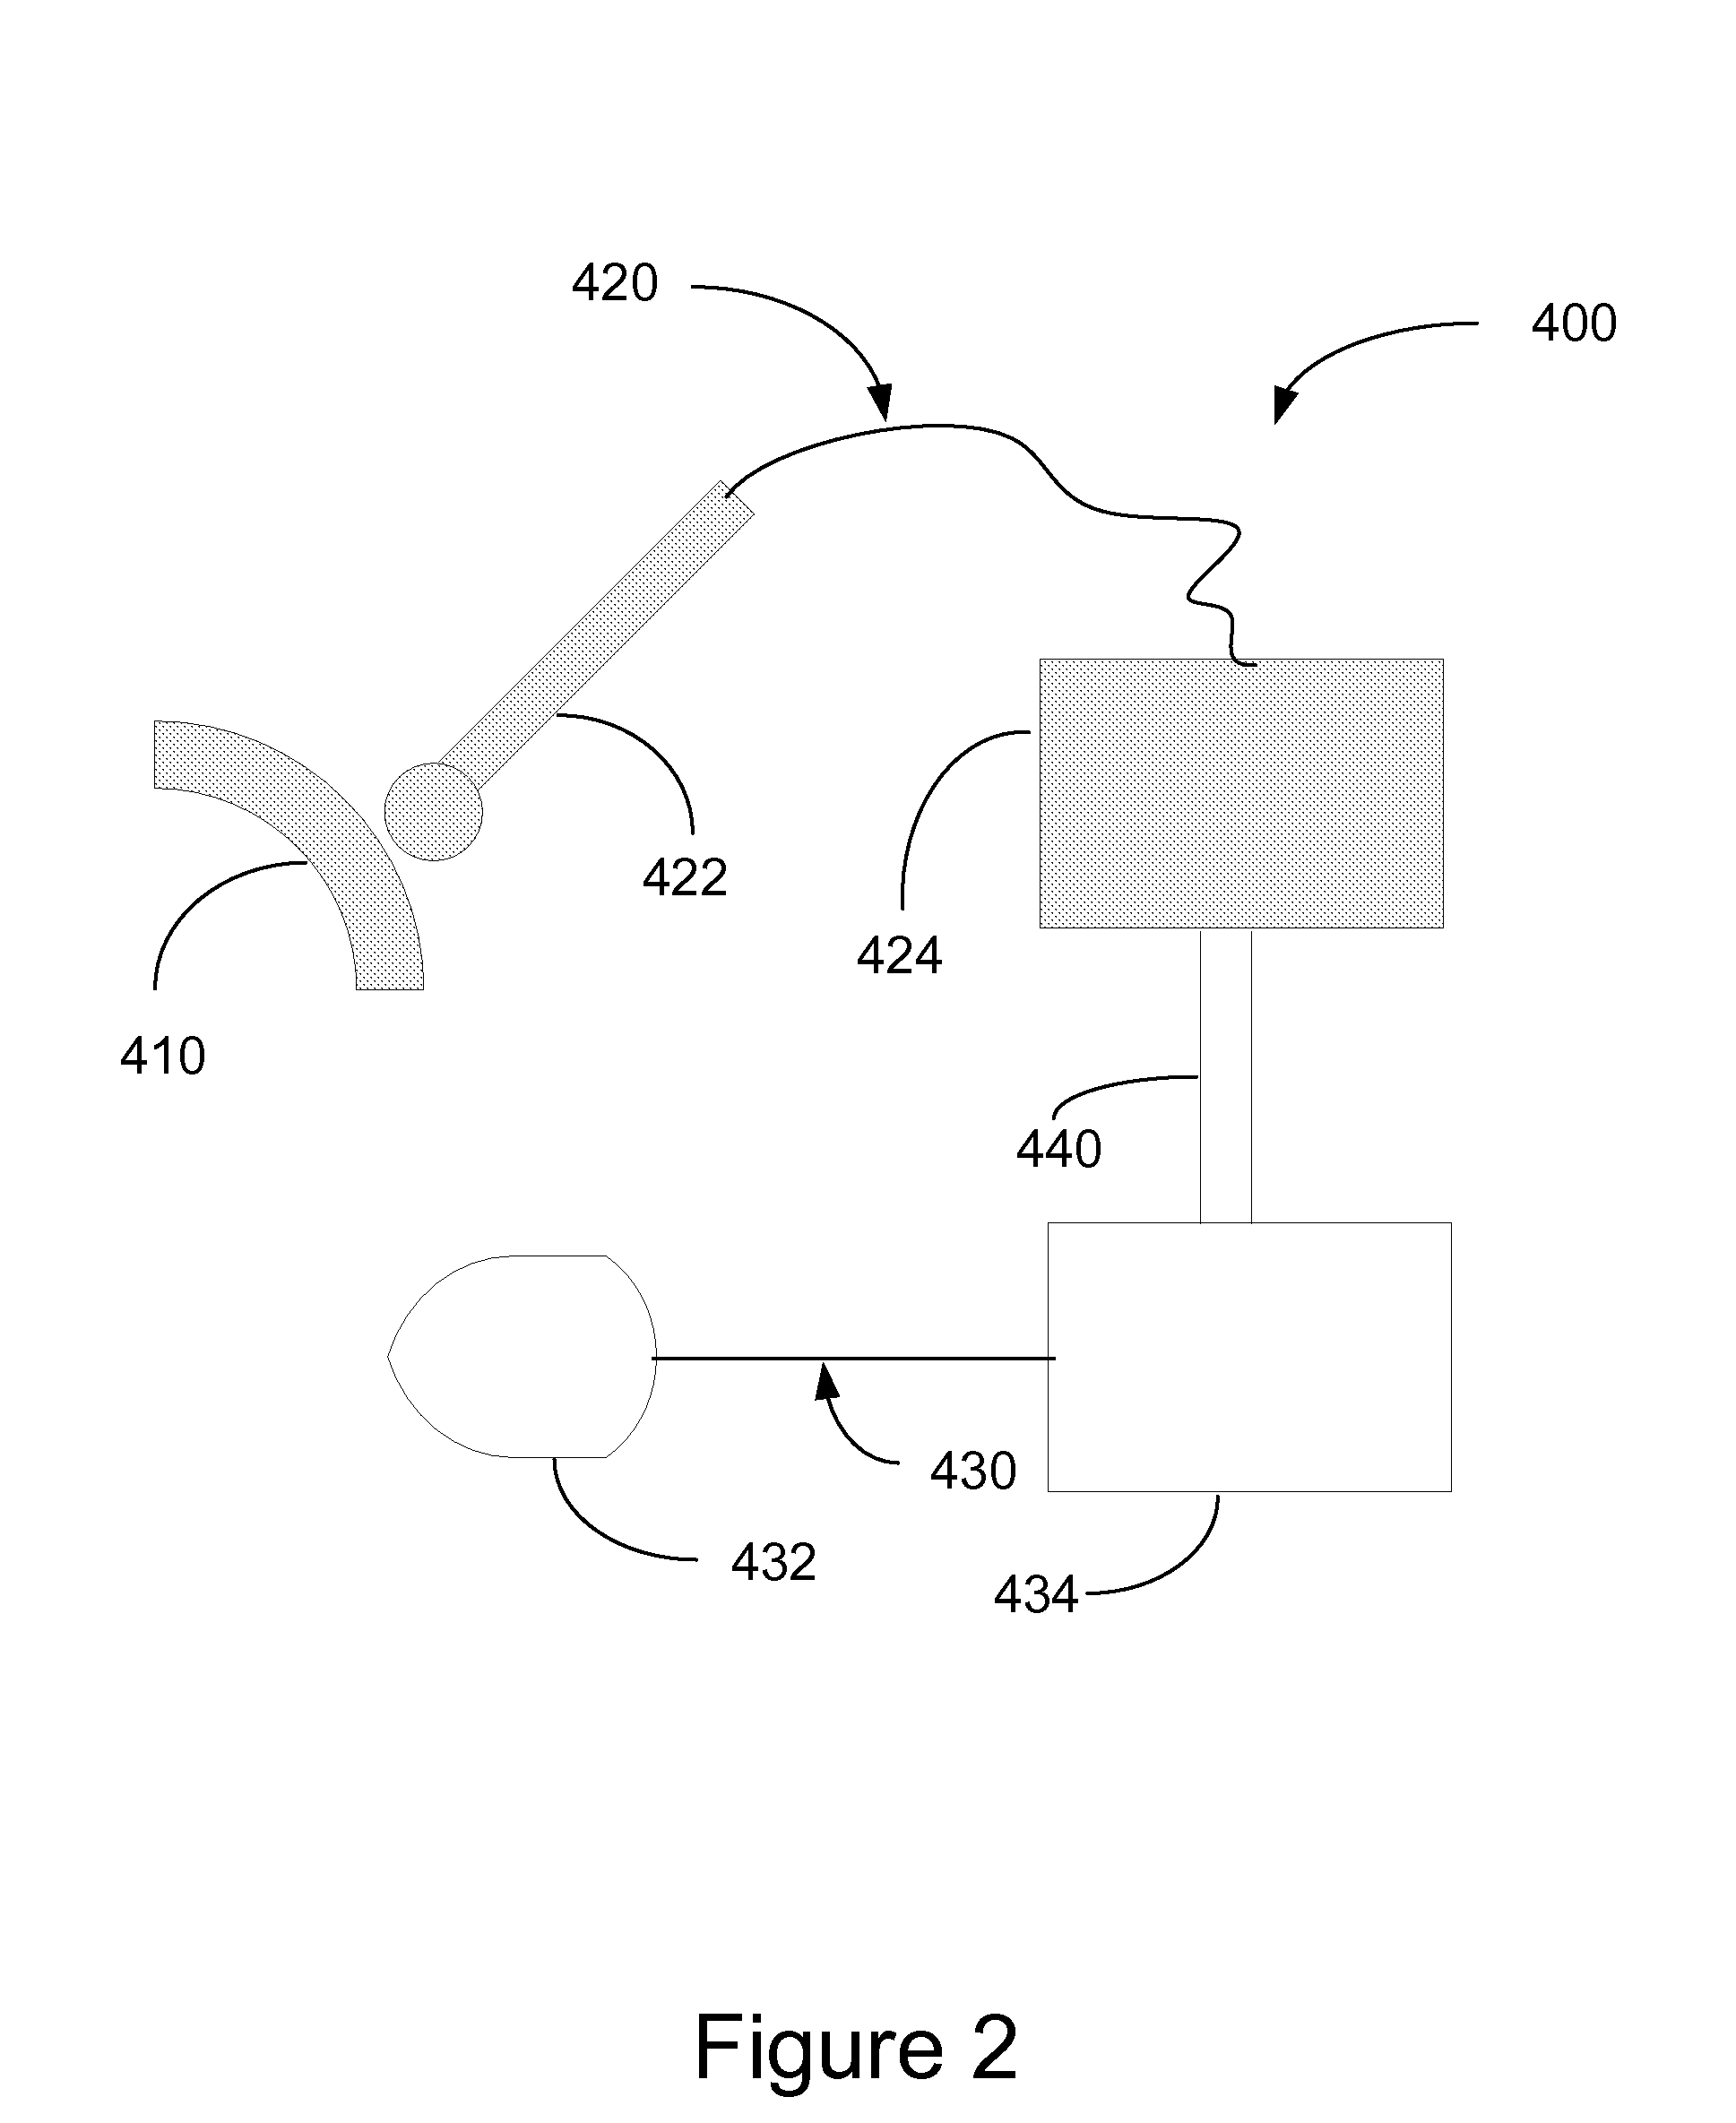 Methods and Systems for Automatically Assessing and Reporting Structural Health